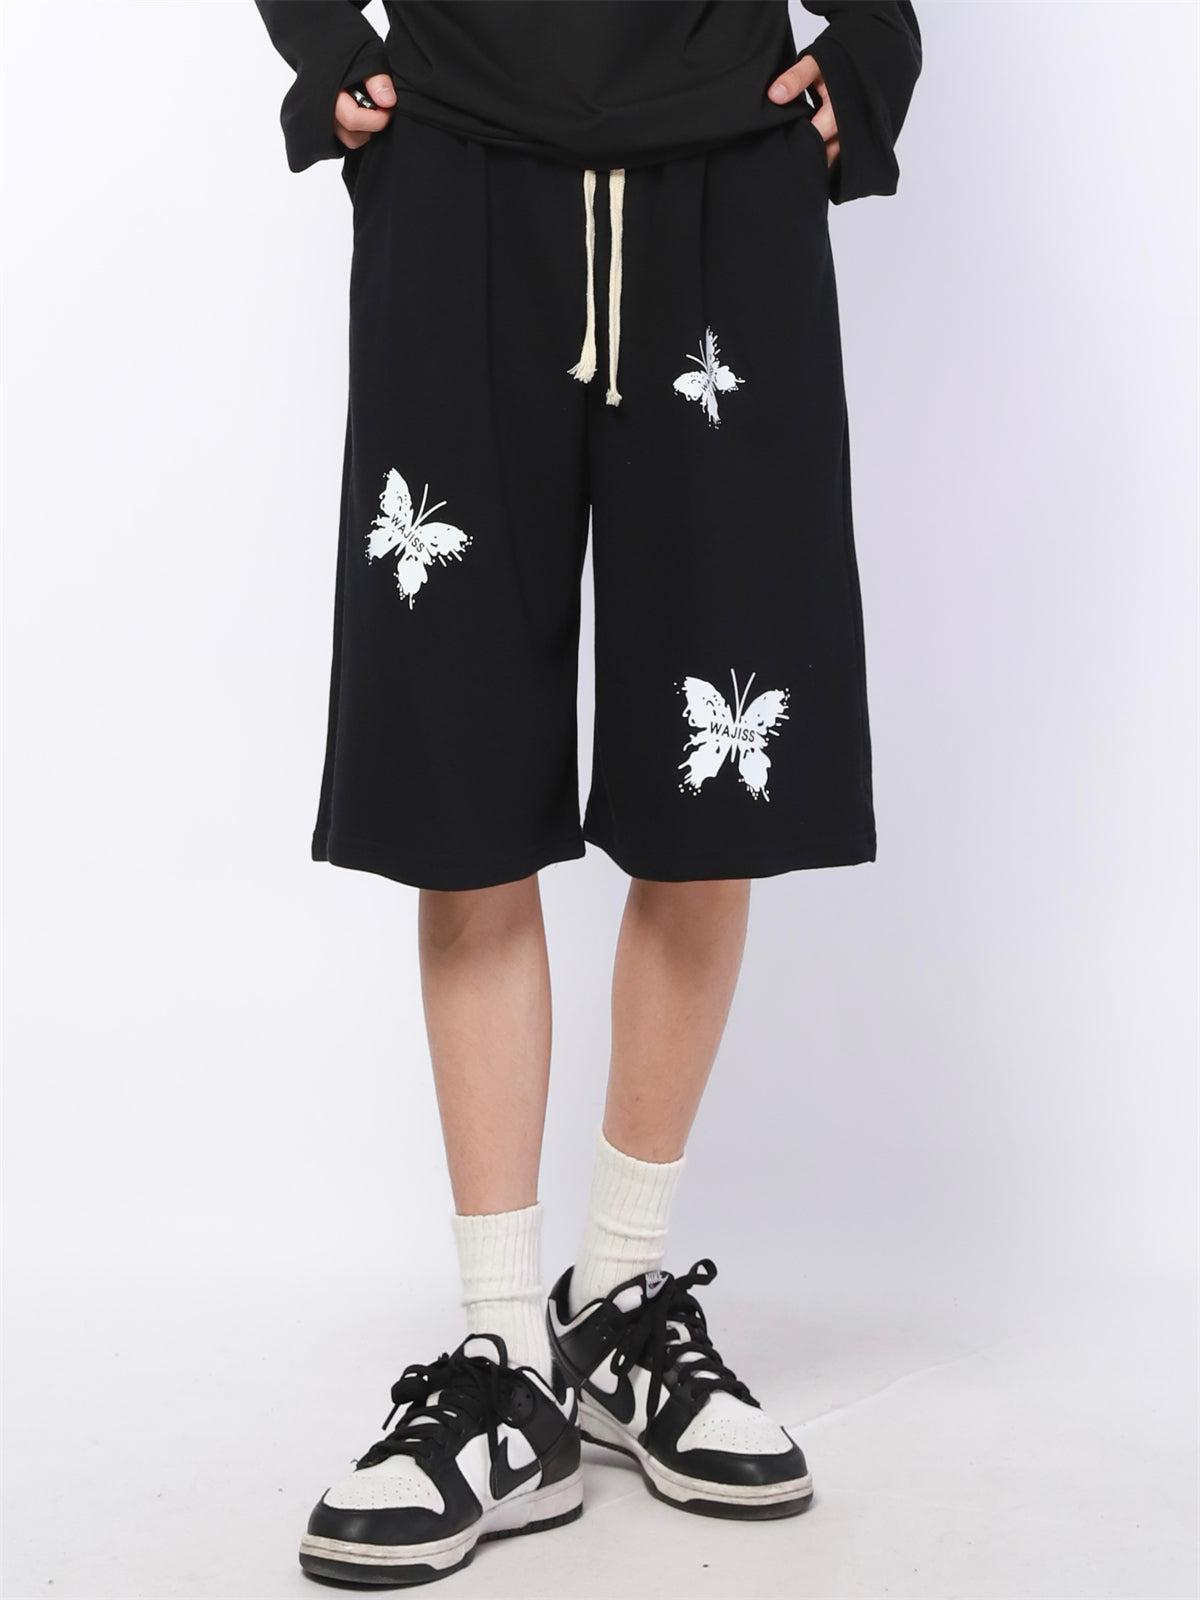 Made Extreme Butterfly Graphic Pattern Shorts Korean Street Fashion Shorts By Made Extreme Shop Online at OH Vault